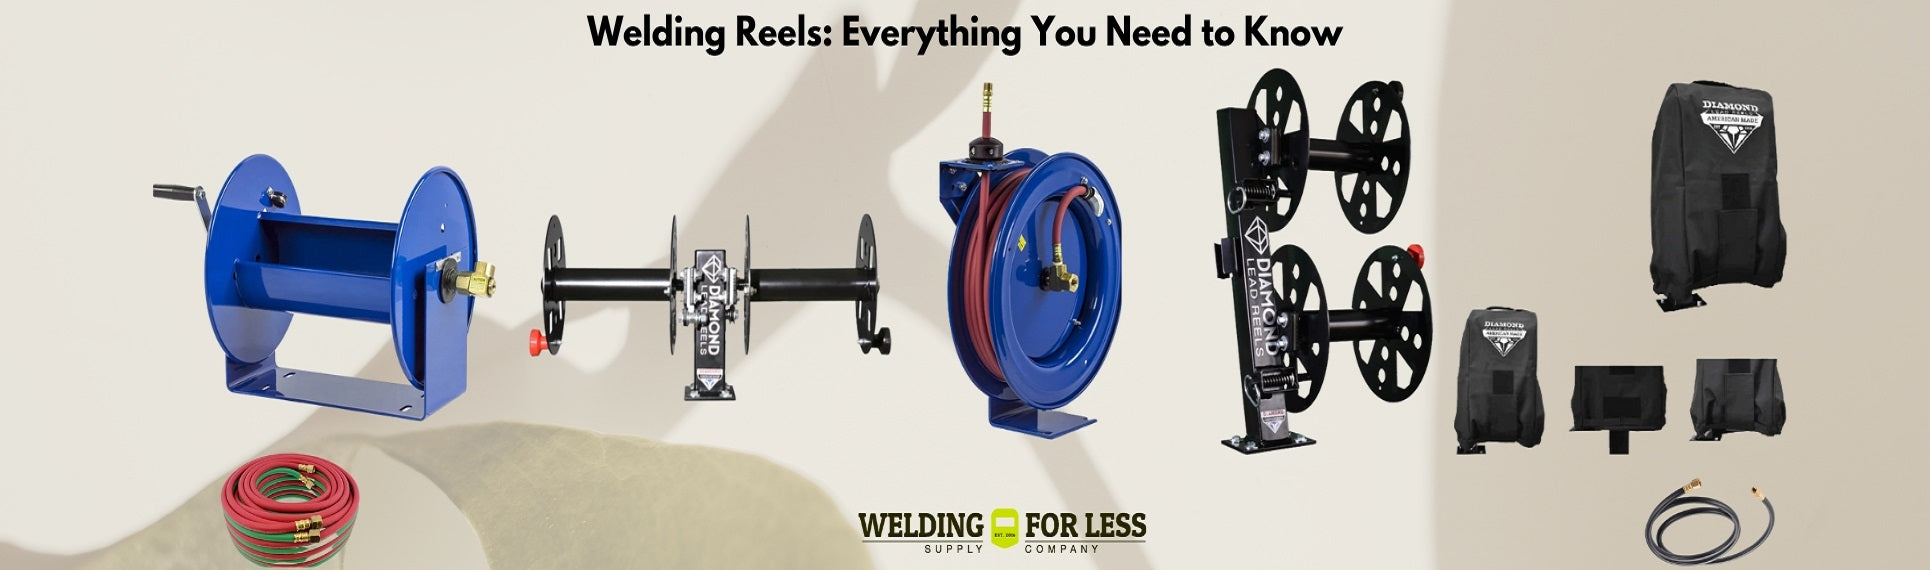 Welding Reels: Everything Needs to Know I Welding For Less